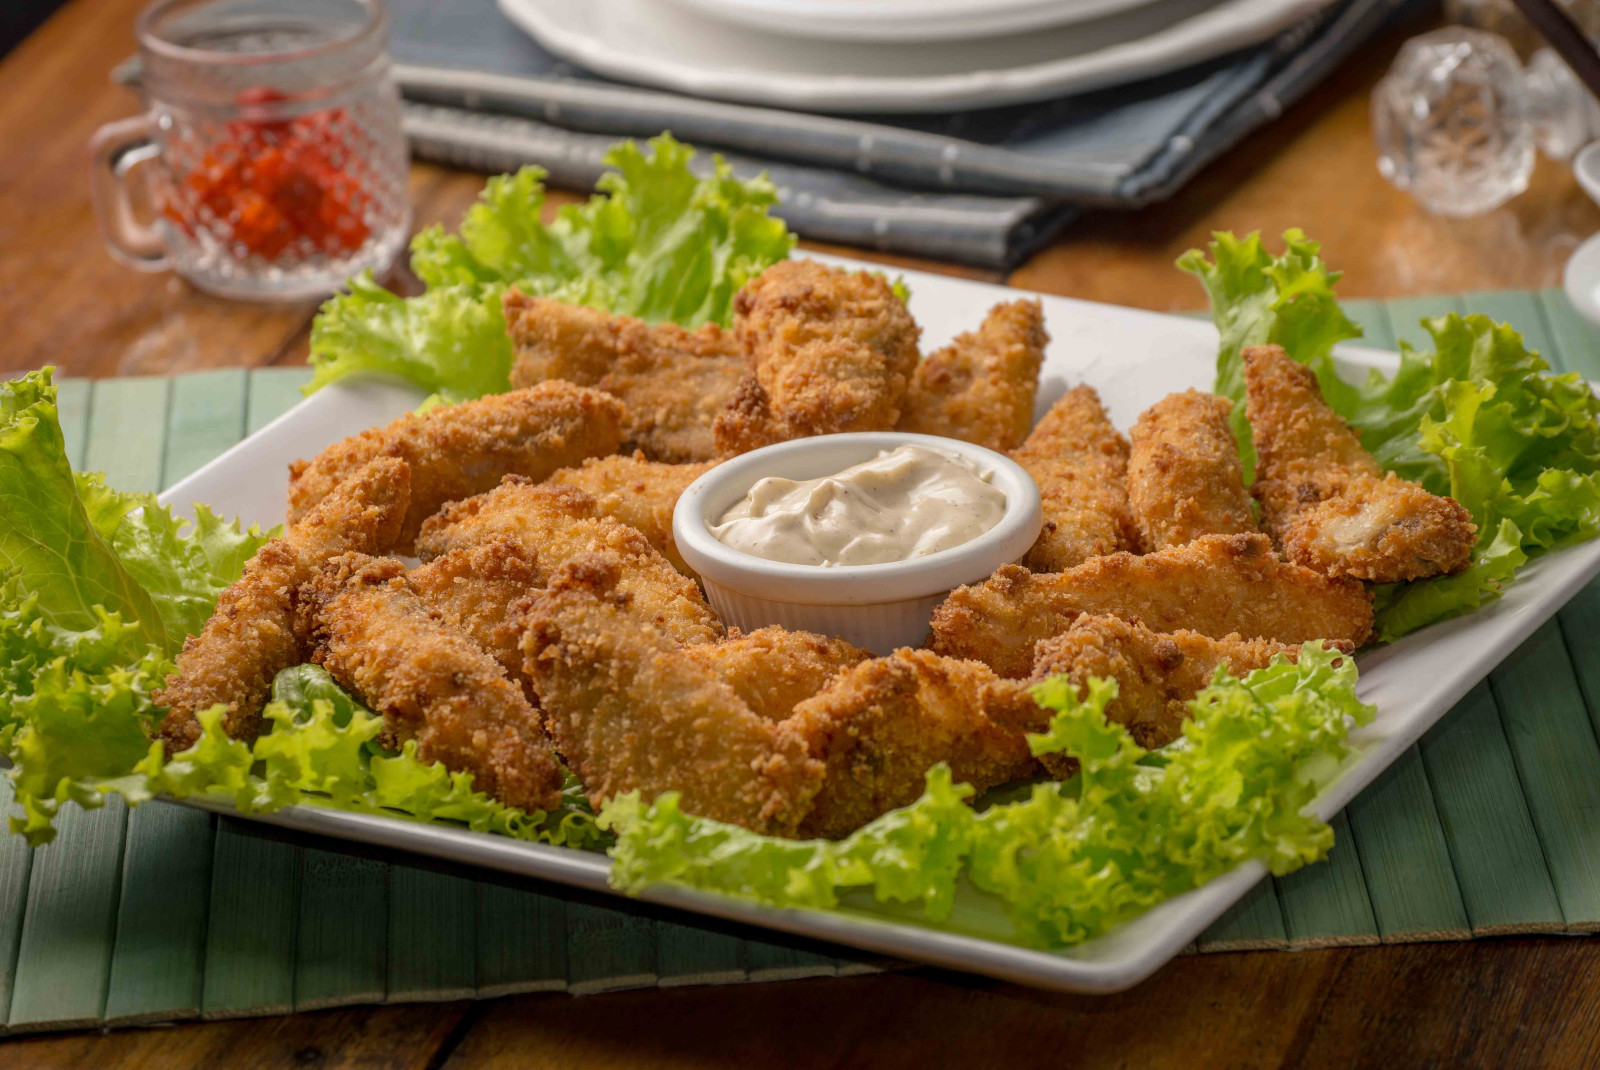 Tan chicken fingers with green lettuce on a white plate and white sauce in the center in Madeira, Portugal.